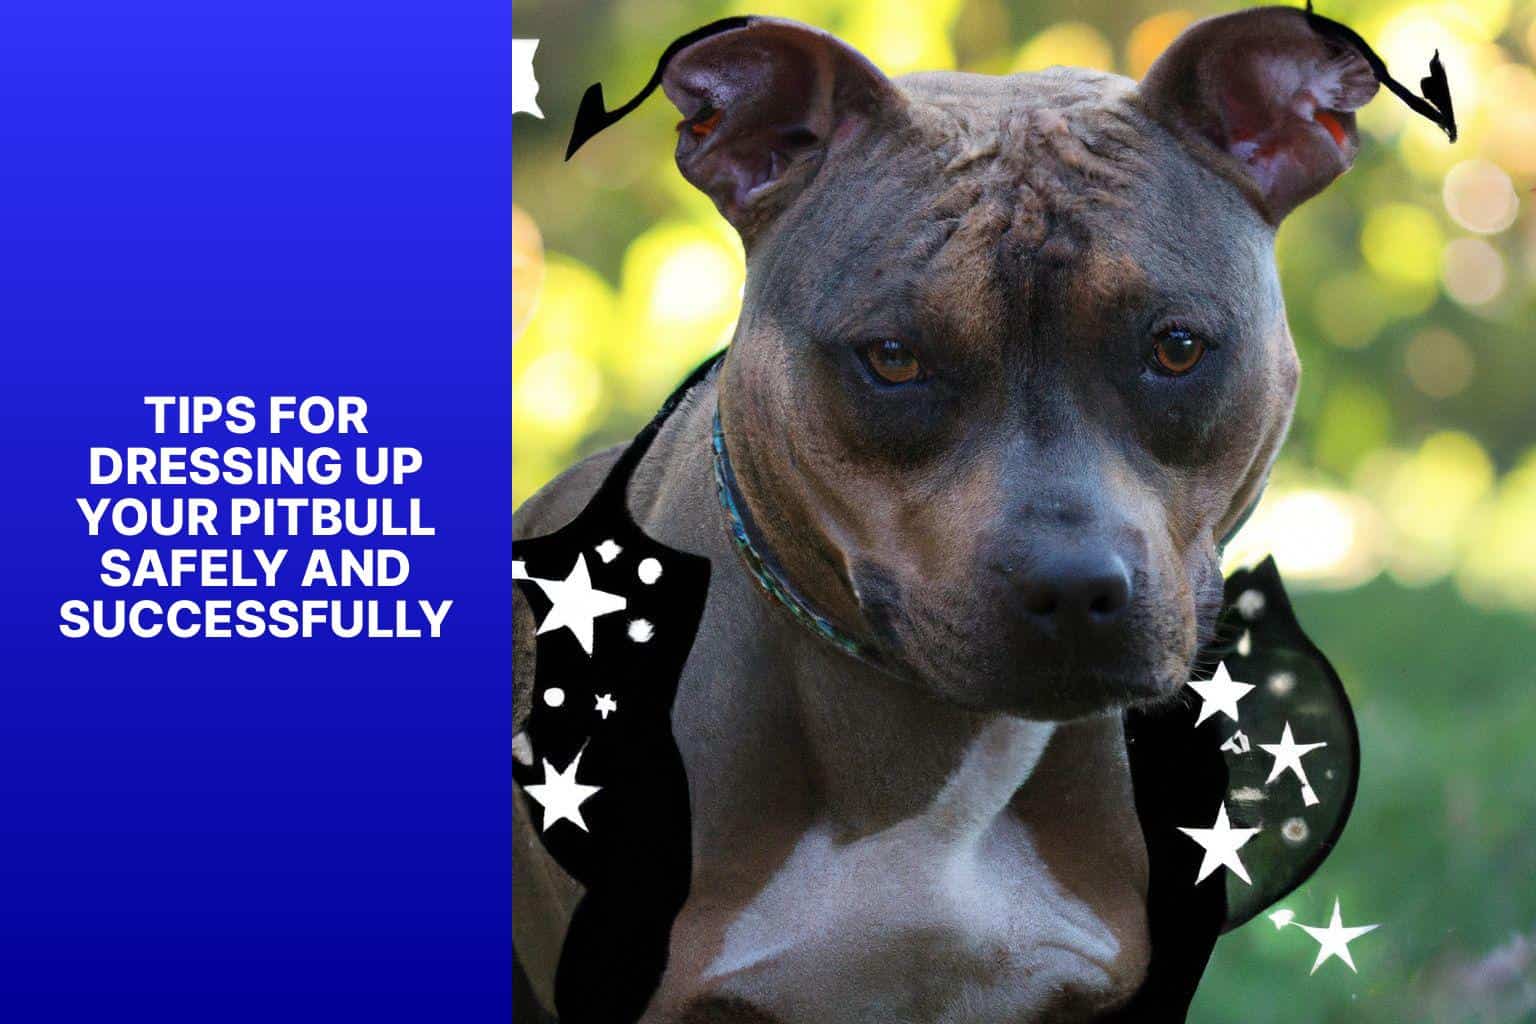 Tips for Dressing Up Your Pitbull Safely and Successfully - halloween costumes for pitbulls 